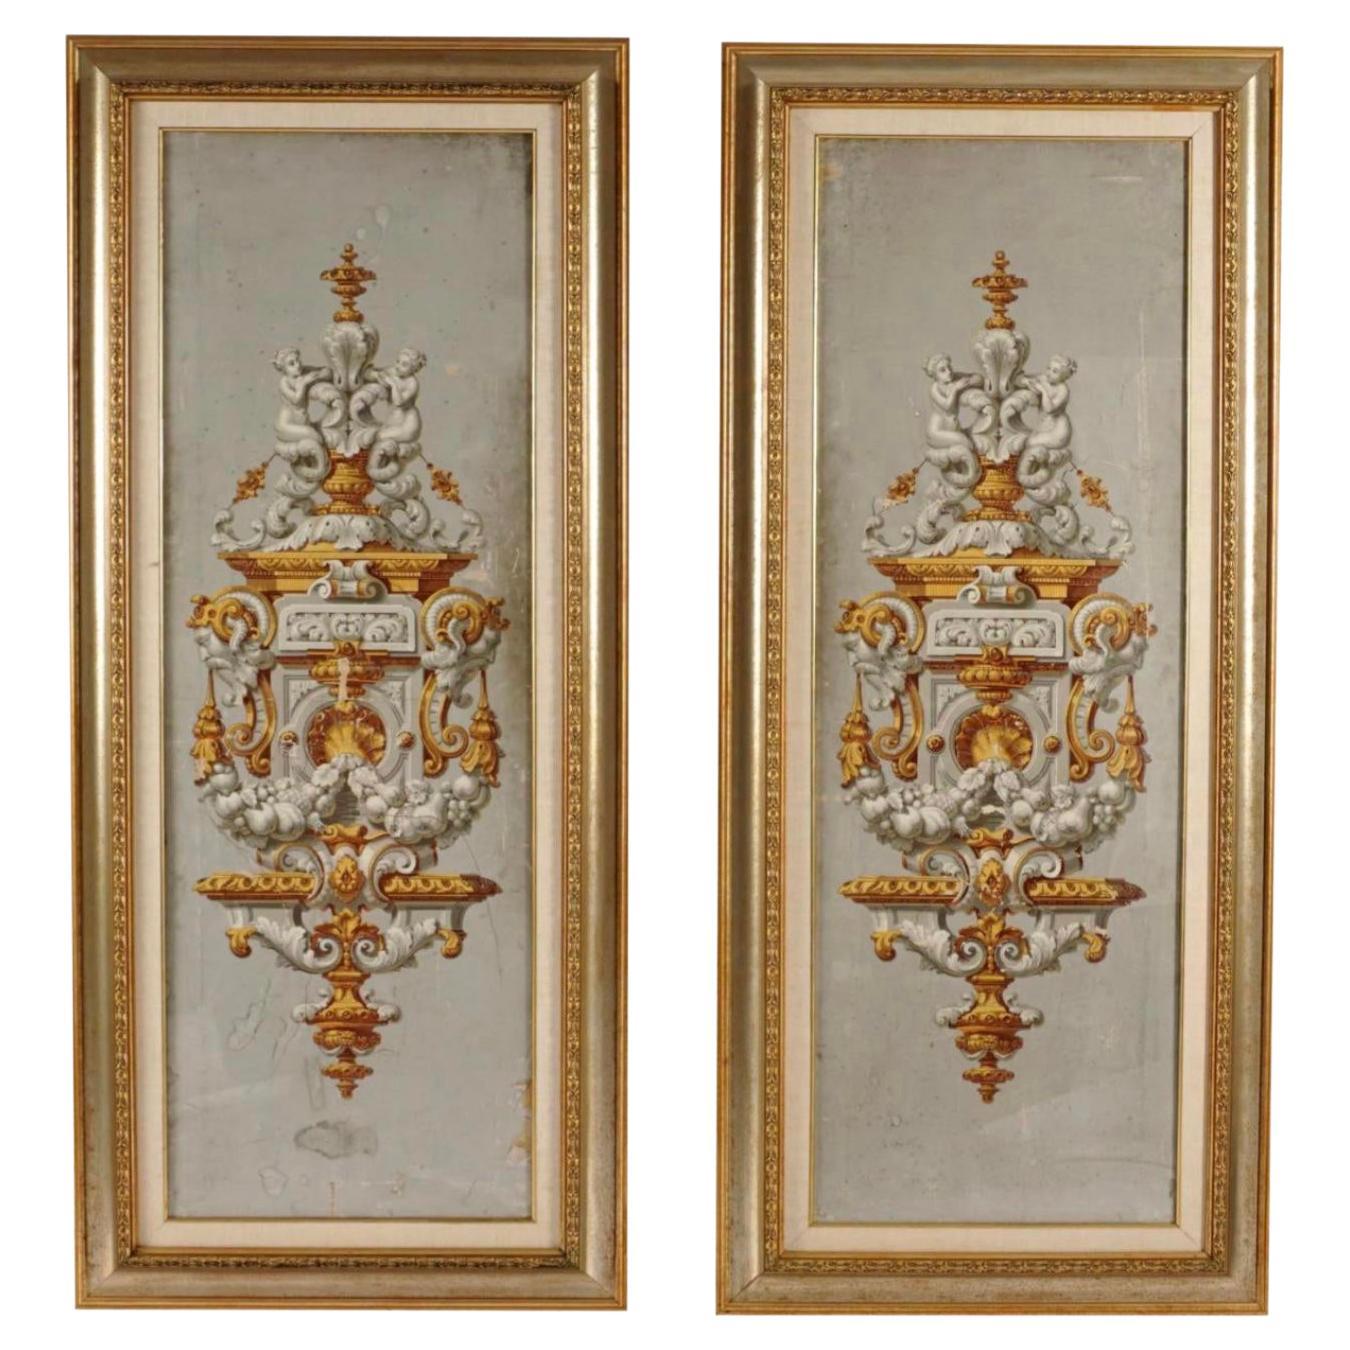 19th Century French Hand Painted Framed Wallpaper Panels, a Pair